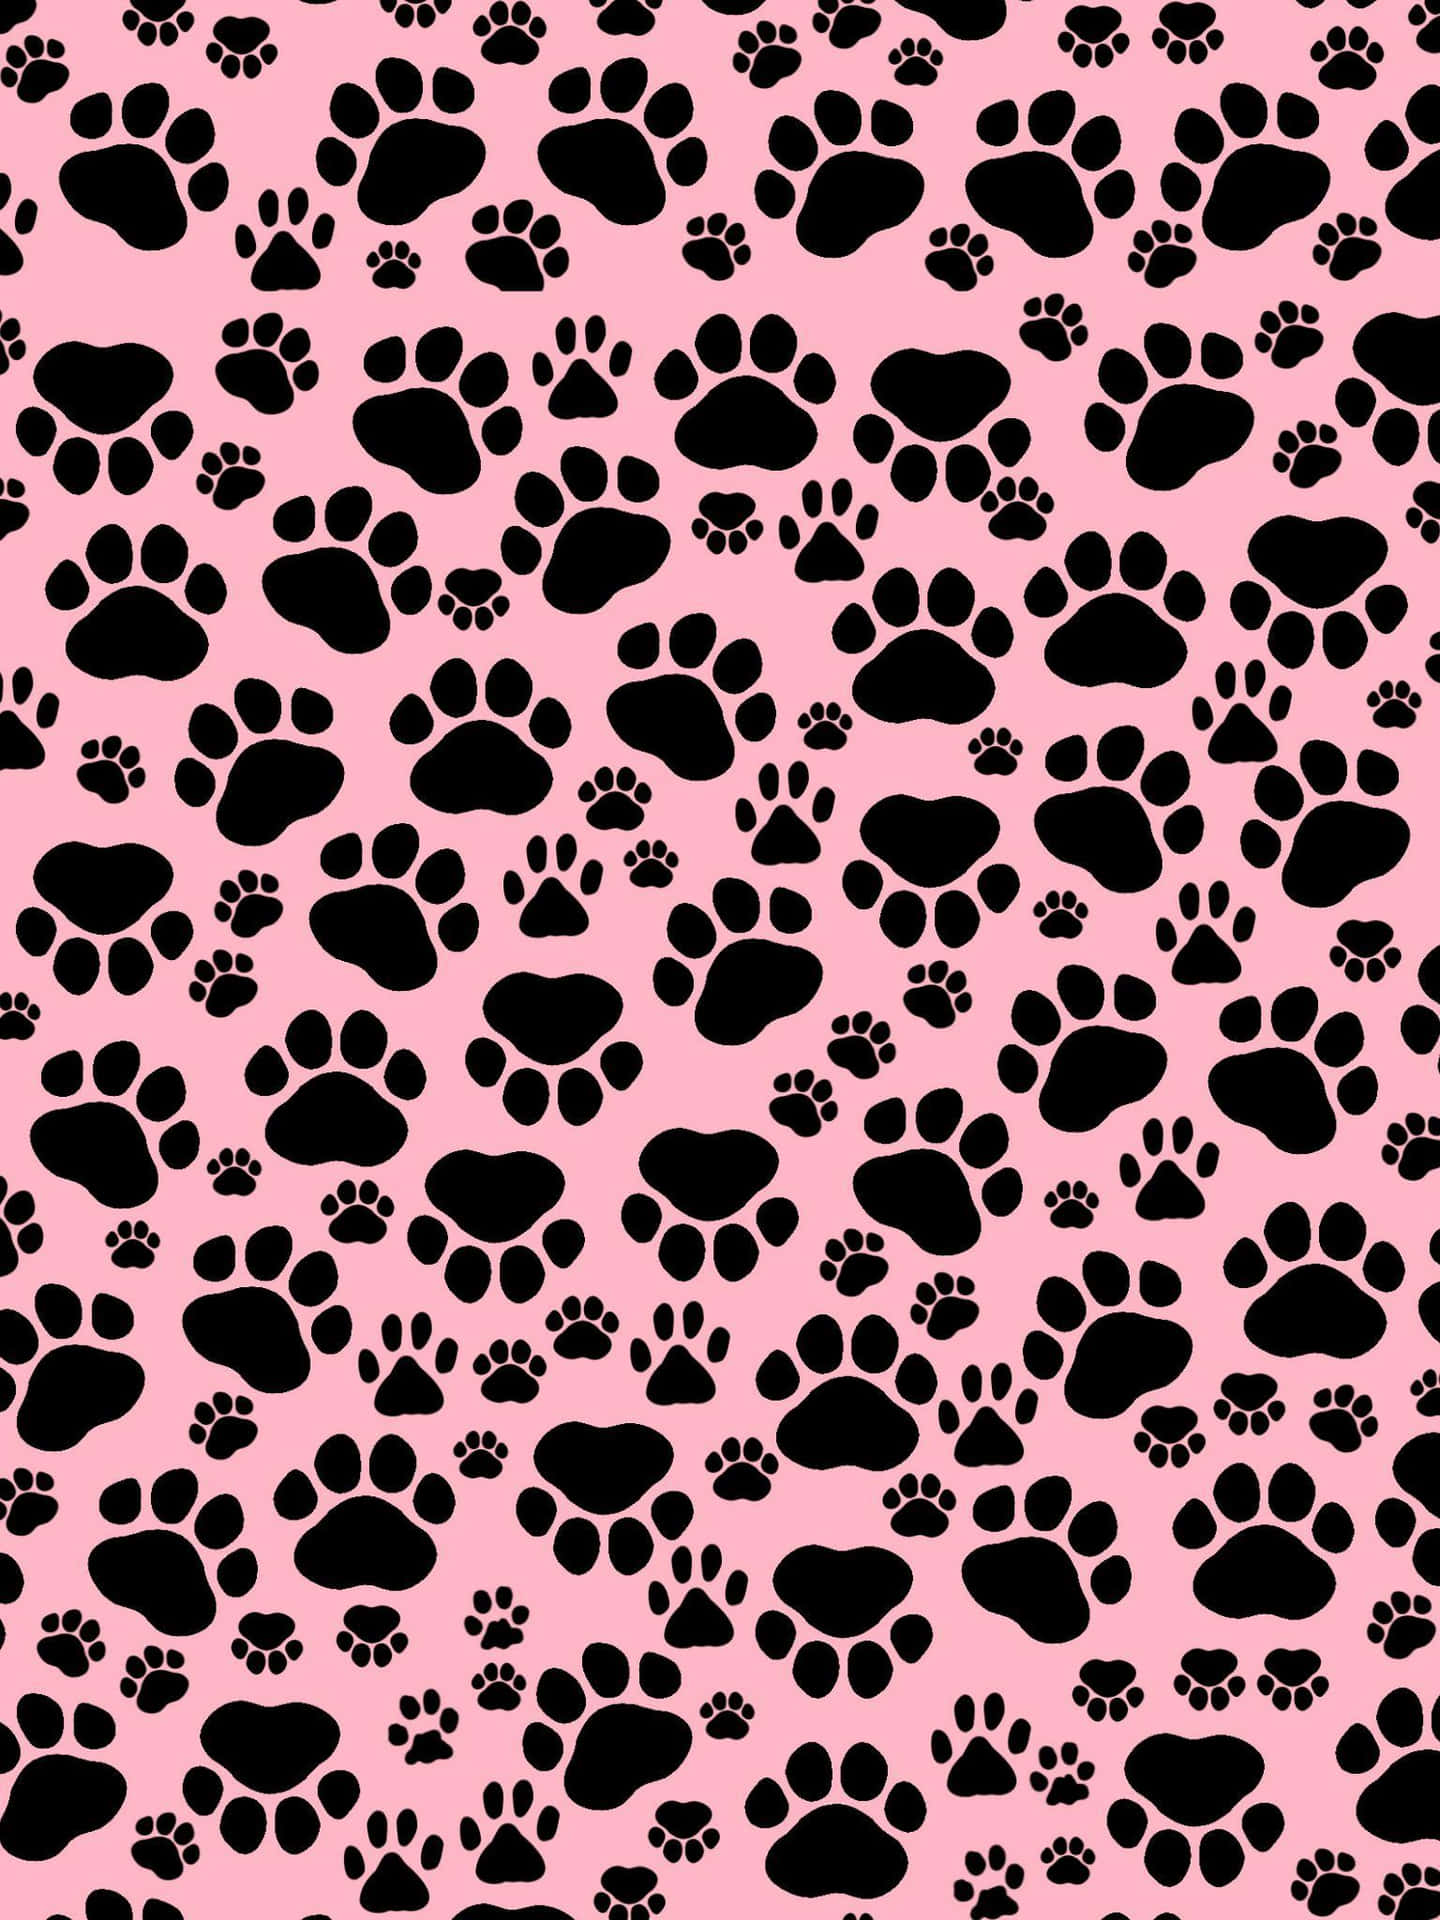 Hand doodle with funny dogs paw prints and bones Vector seamless pattern  wallpaper background Cute surface design for fabric textile design  wrapping paper  Stock Image  Everypixel